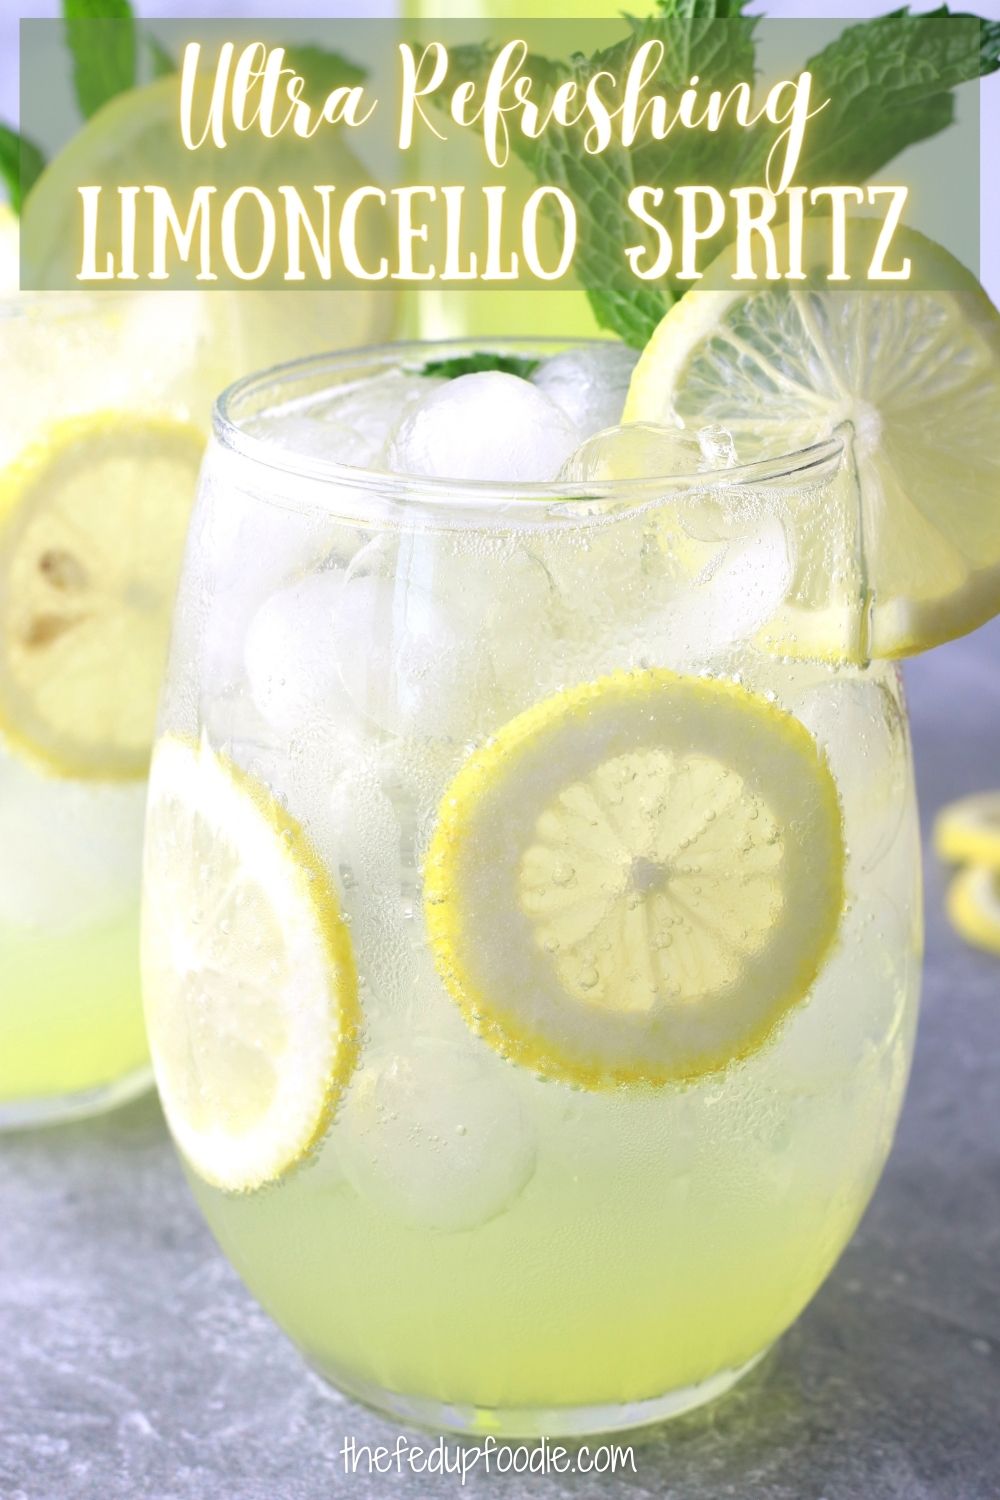 The perfect summer cocktail for lemon lovers, this quick and easy Limoncello Spritz is made of 3 simple ingredients. Because it is bubbly, refreshing and sweet, it's wonderful for summer parties, BBQ's, bridal showers, etc. Also, a delicious way to enjoy the classic Italian liqueur, Limoncello.
#LimoncelloCocktails #LimoncelloSpritz #LimoncelloSpritzWithProsecco #LimoncelloSpritzRecipe #SpritzCocktail #LemoncelloRecipeDrinks 